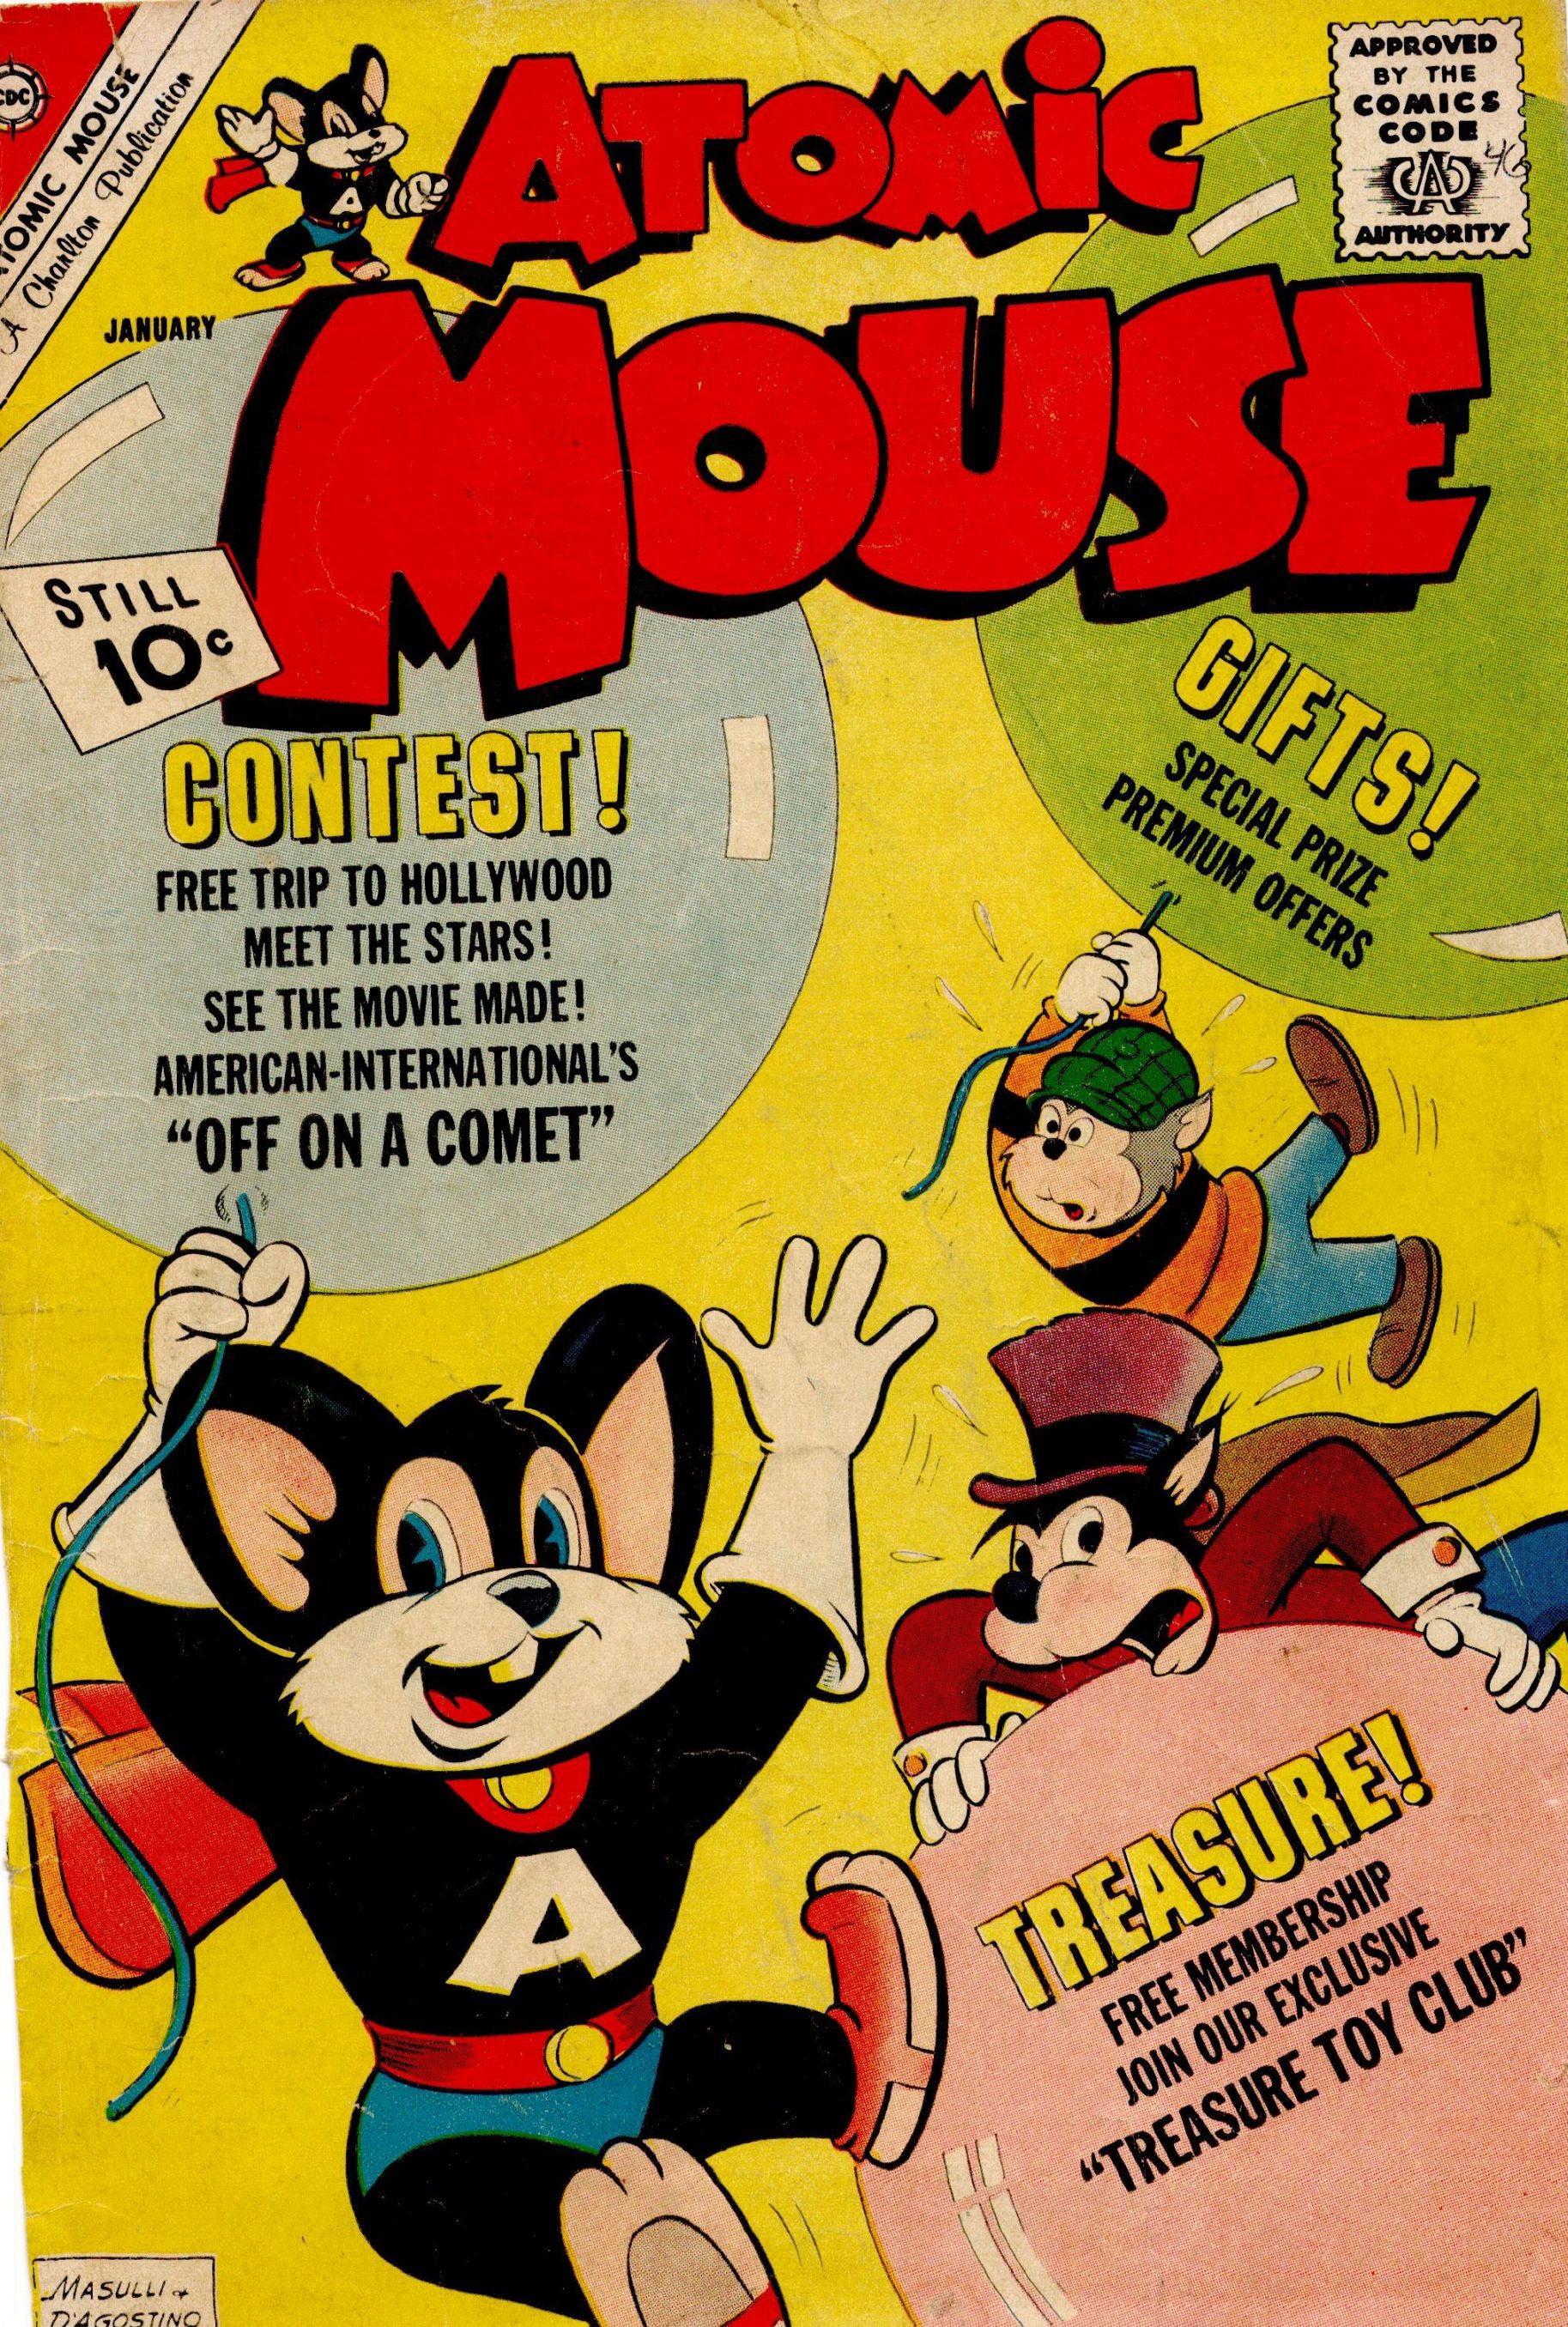 Read online Atomic Mouse comic -  Issue #46 - 1